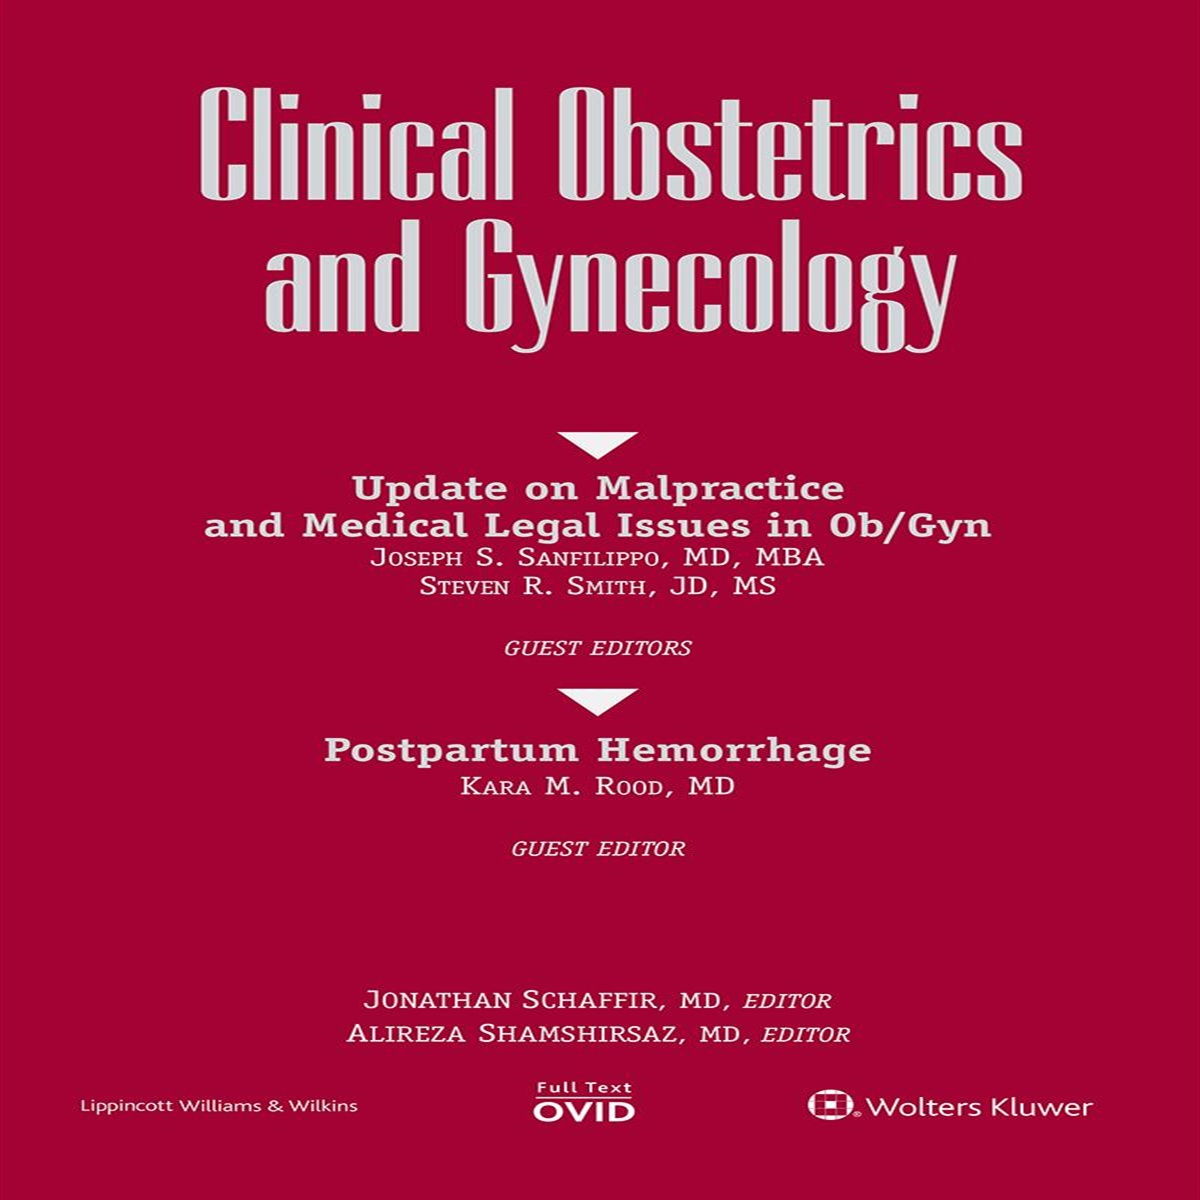 Contributors: Update on Malpractice and Medical Legal Issues in Ob/Gyn